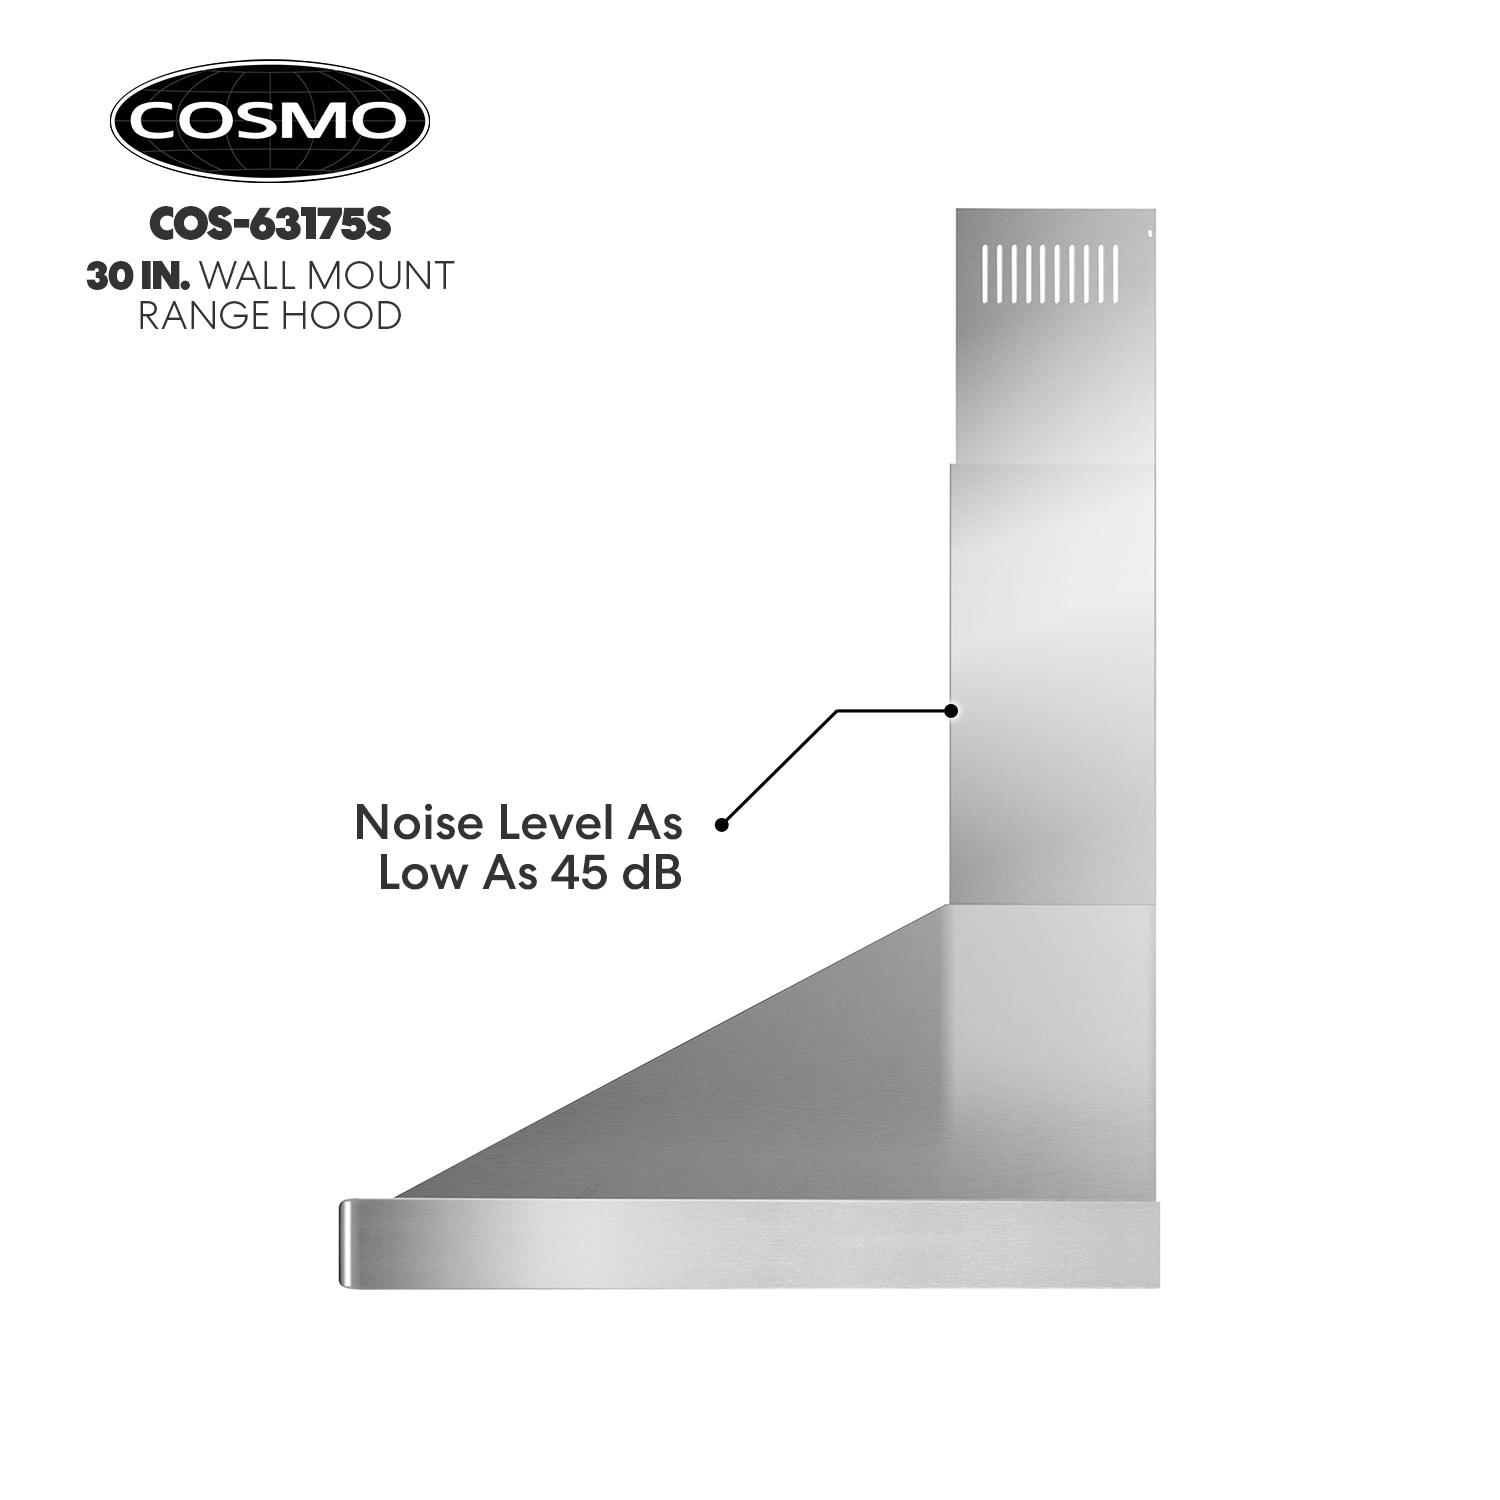 Cosmo 30 in. Ducted Wall Mount Range Hood in Stainless Steel with